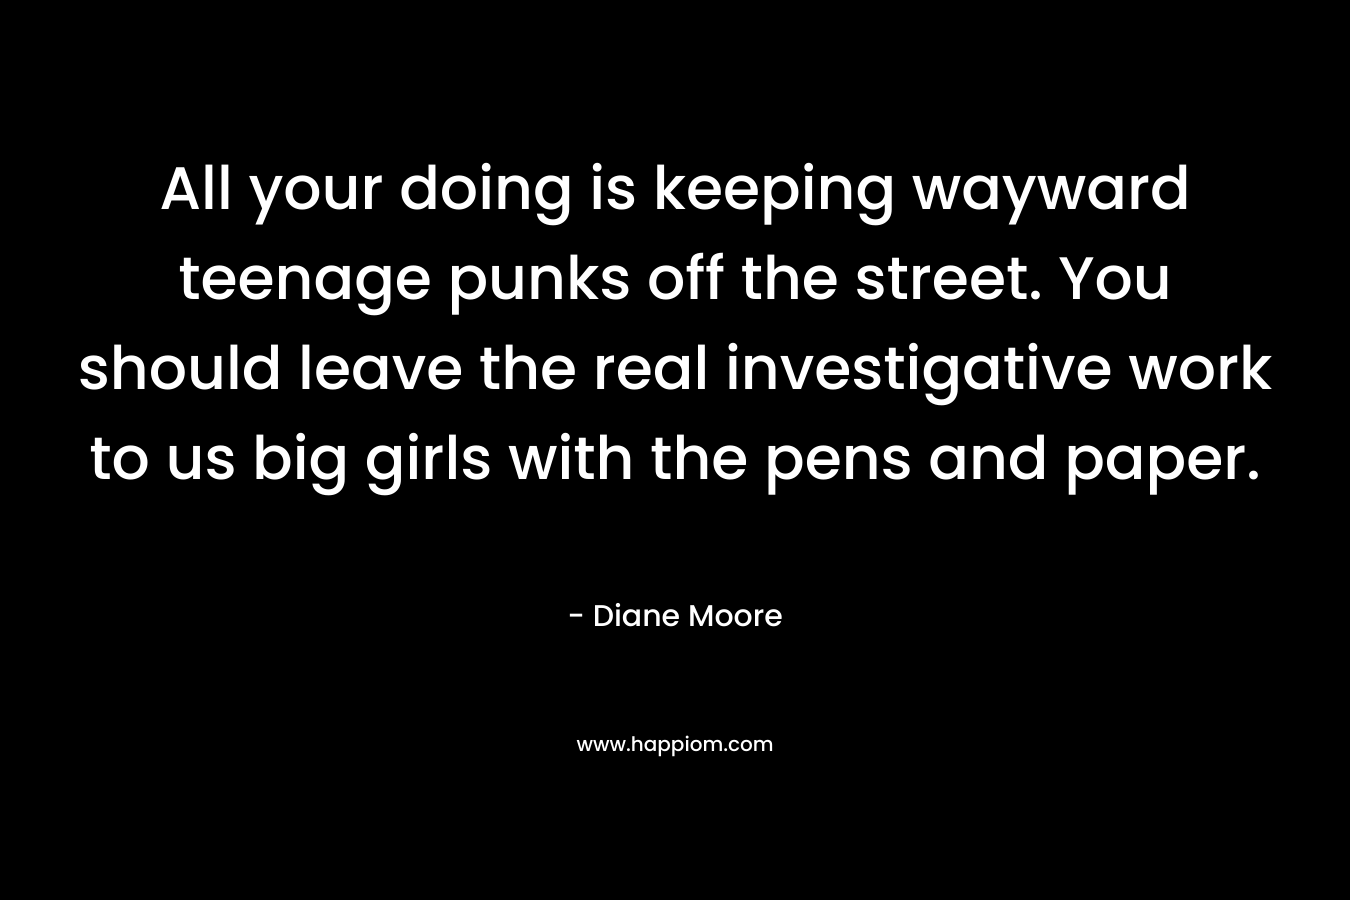 All your doing is keeping wayward teenage punks off the street. You should leave the real investigative work to us big girls with the pens and paper. – Diane Moore